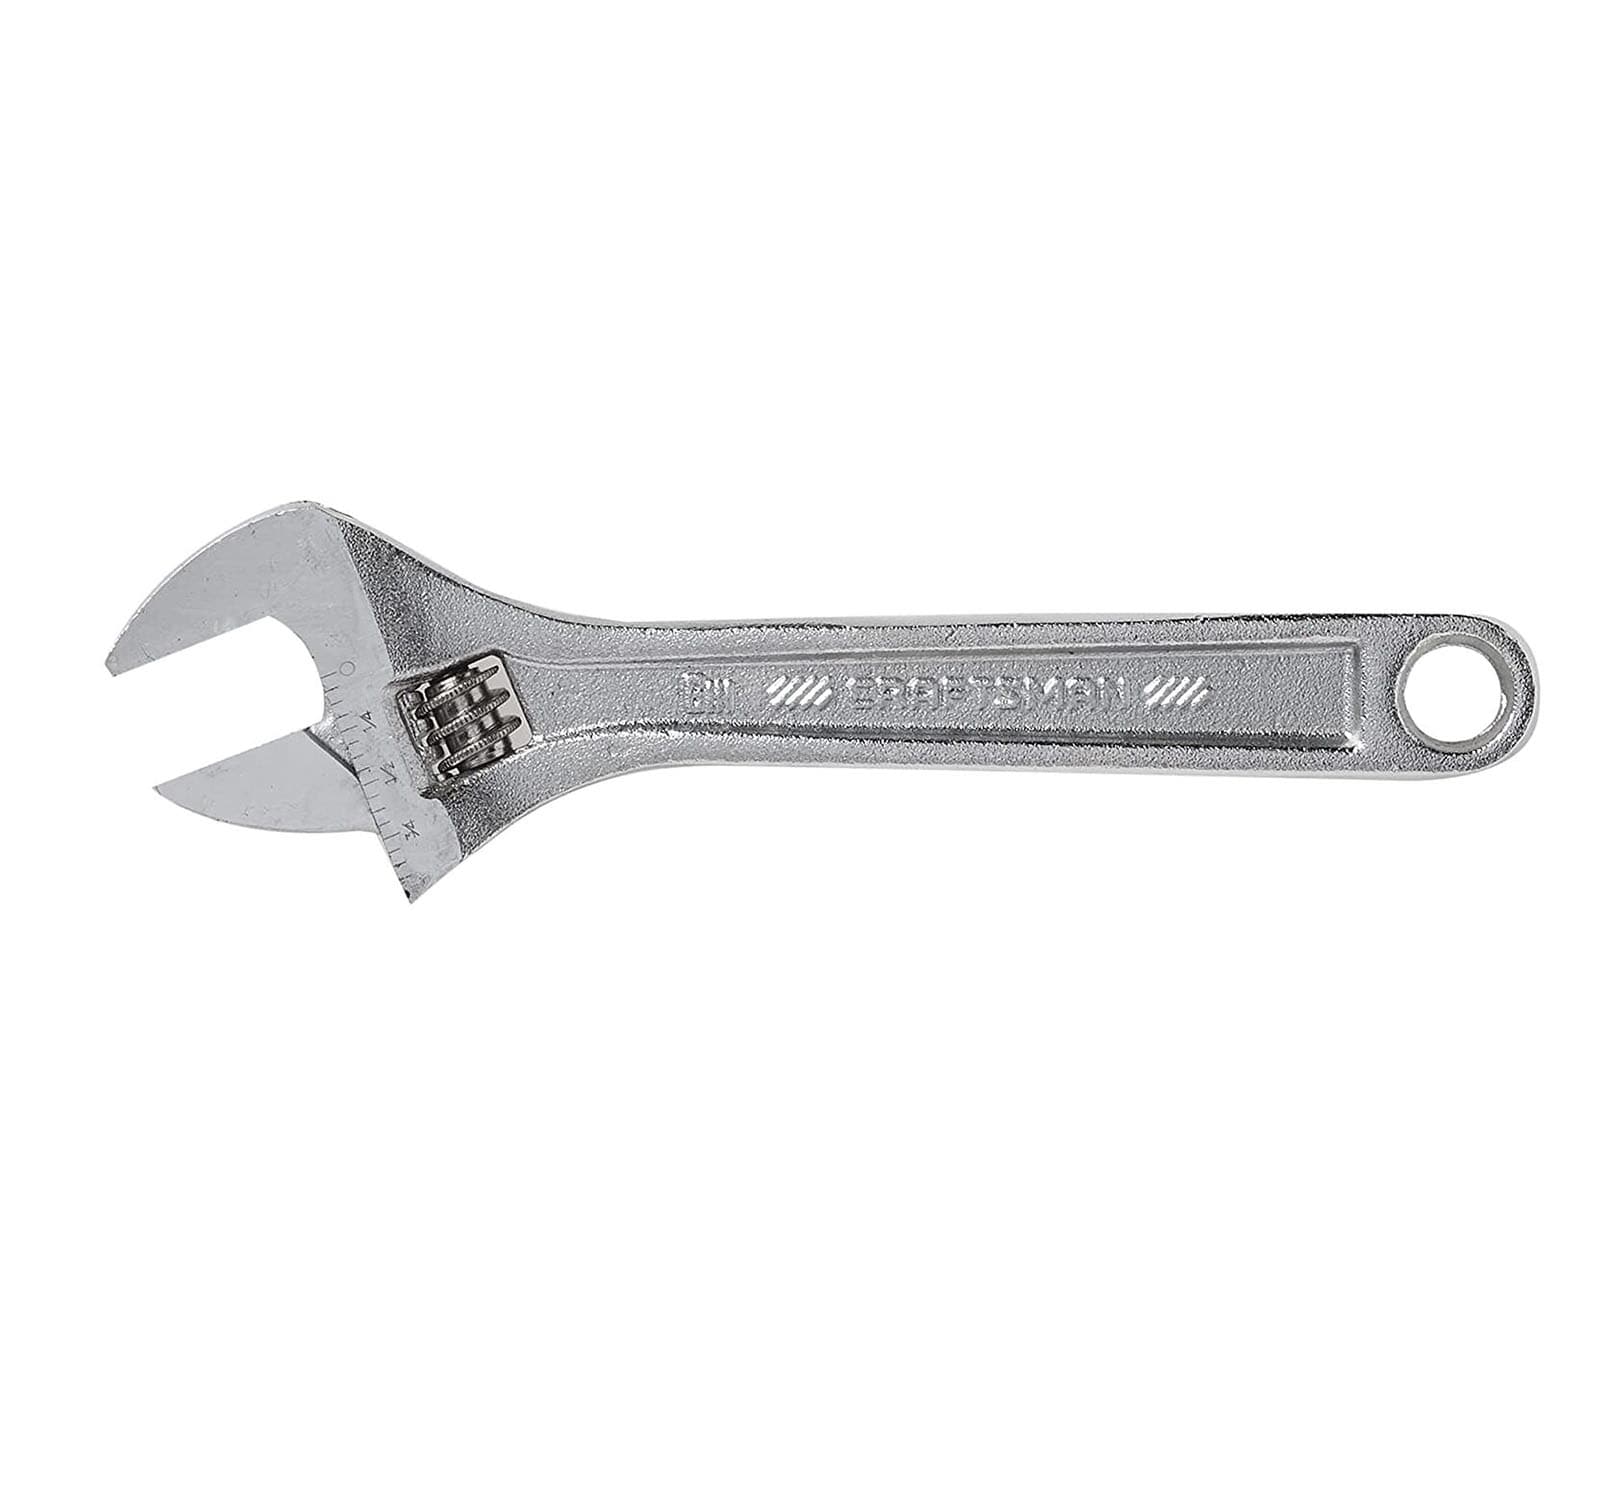 beyond by BLACK+DECKER Adjustable Wrench Set, 6-Inch, 8-Inch